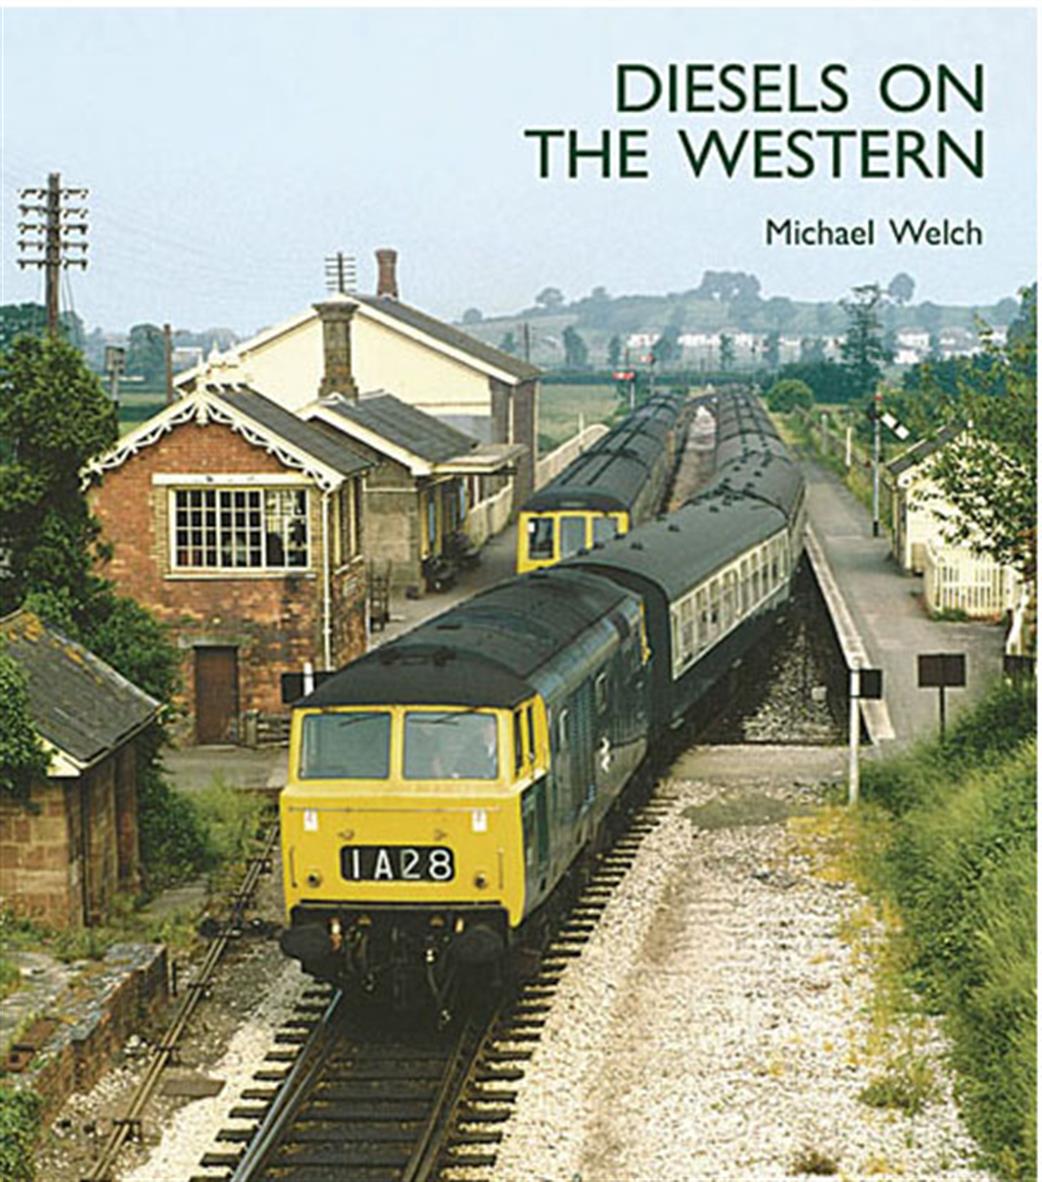 Capital Transport Publishing  9781854143679 Diesels on the Western by Michael Welch